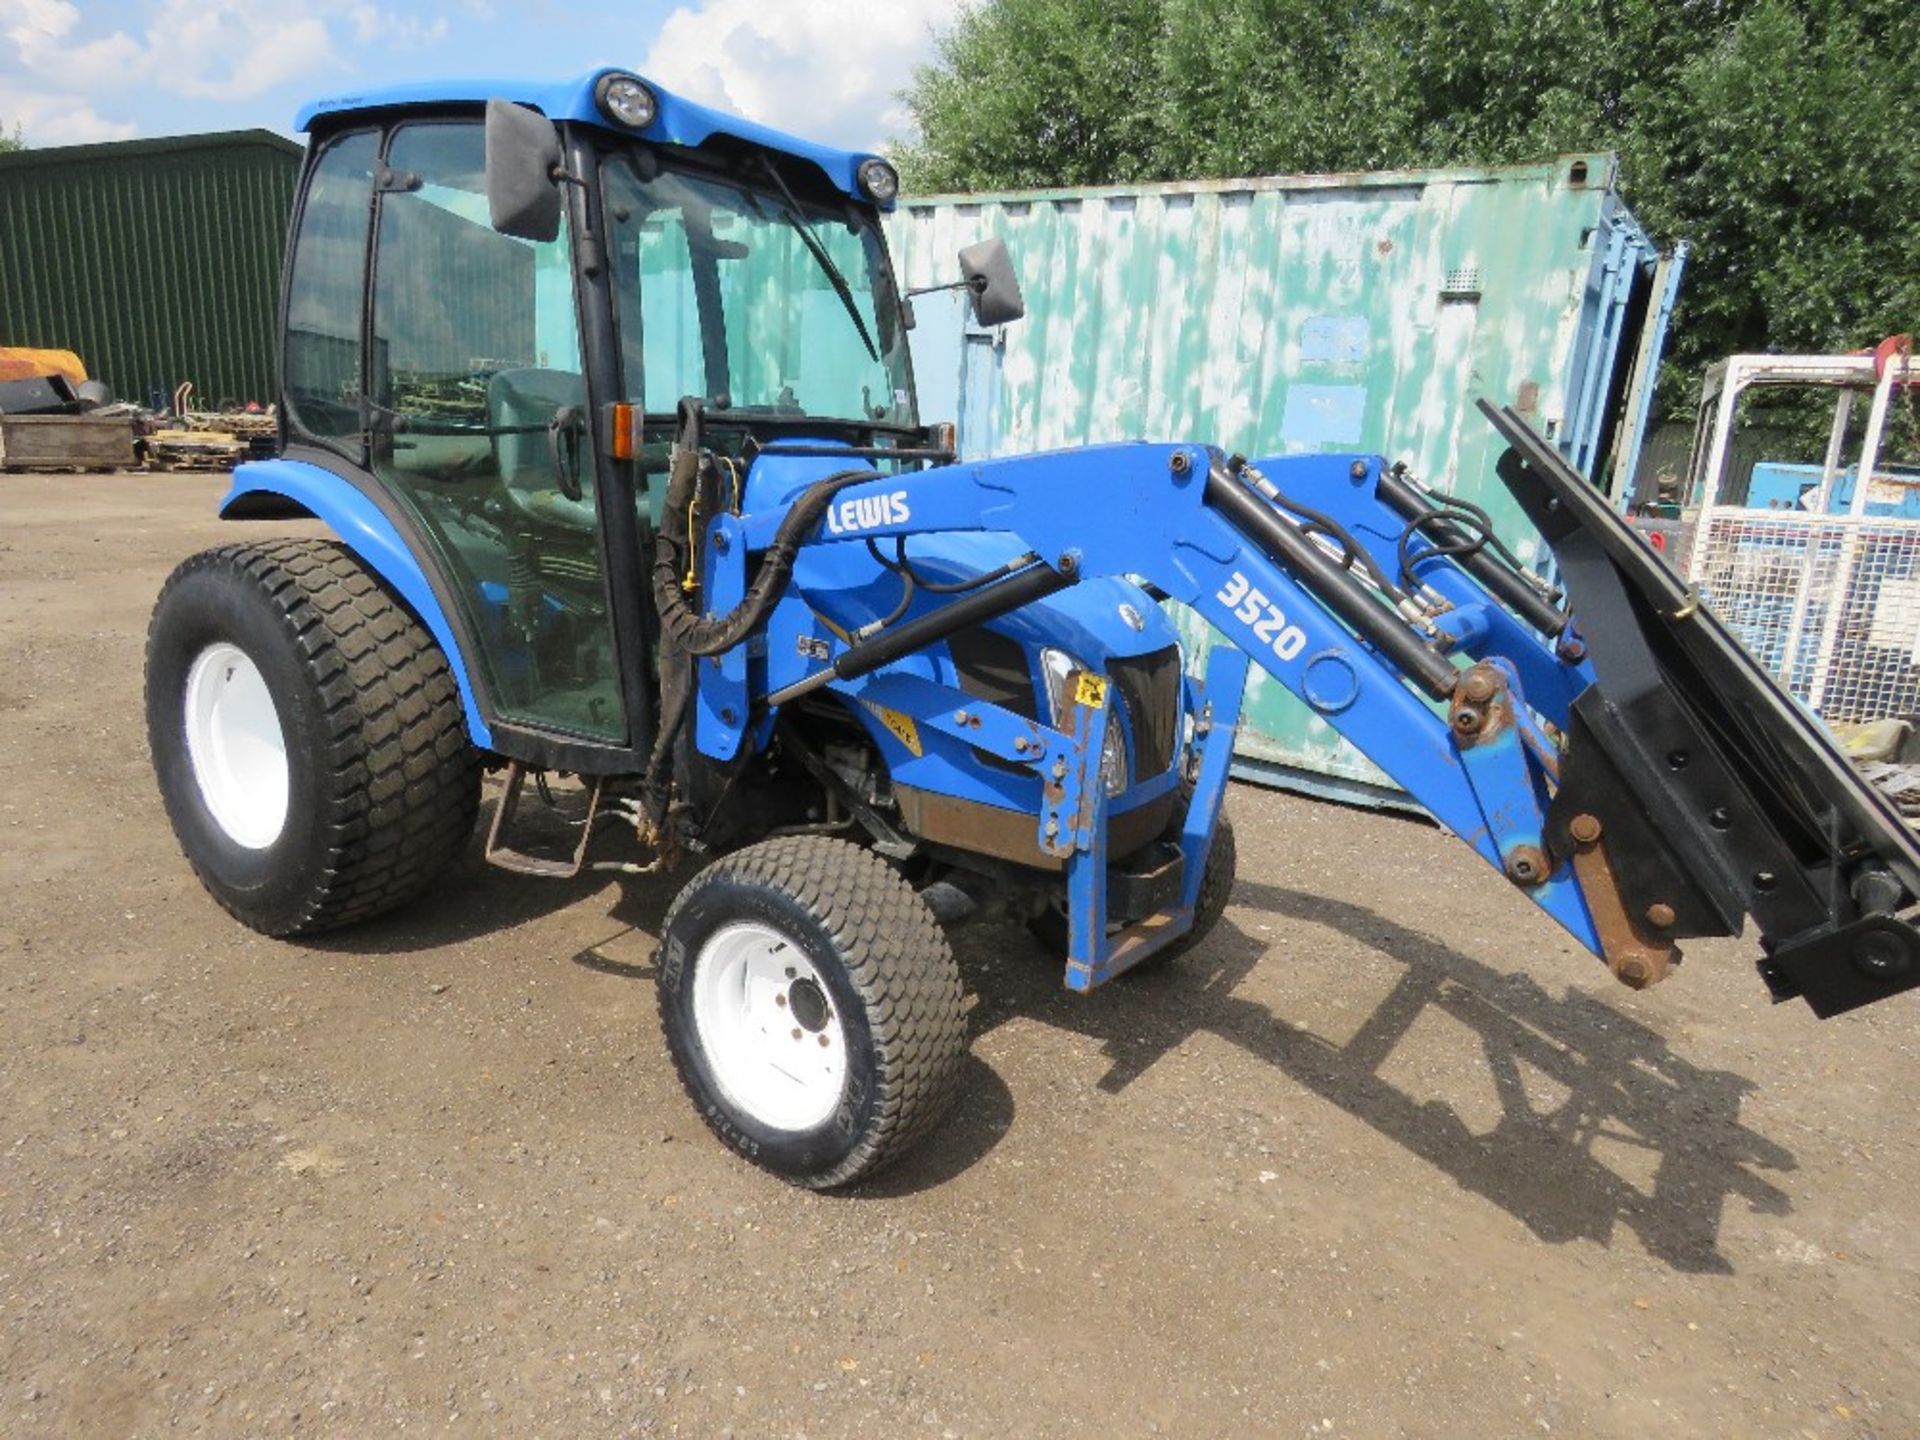 NEW HOLLAND TC45A 4WD COMPACT TRACTOR WITH LEWIS 3520 FRONT LOADER AND PALLET FORKS. REG:SP09 EWG (